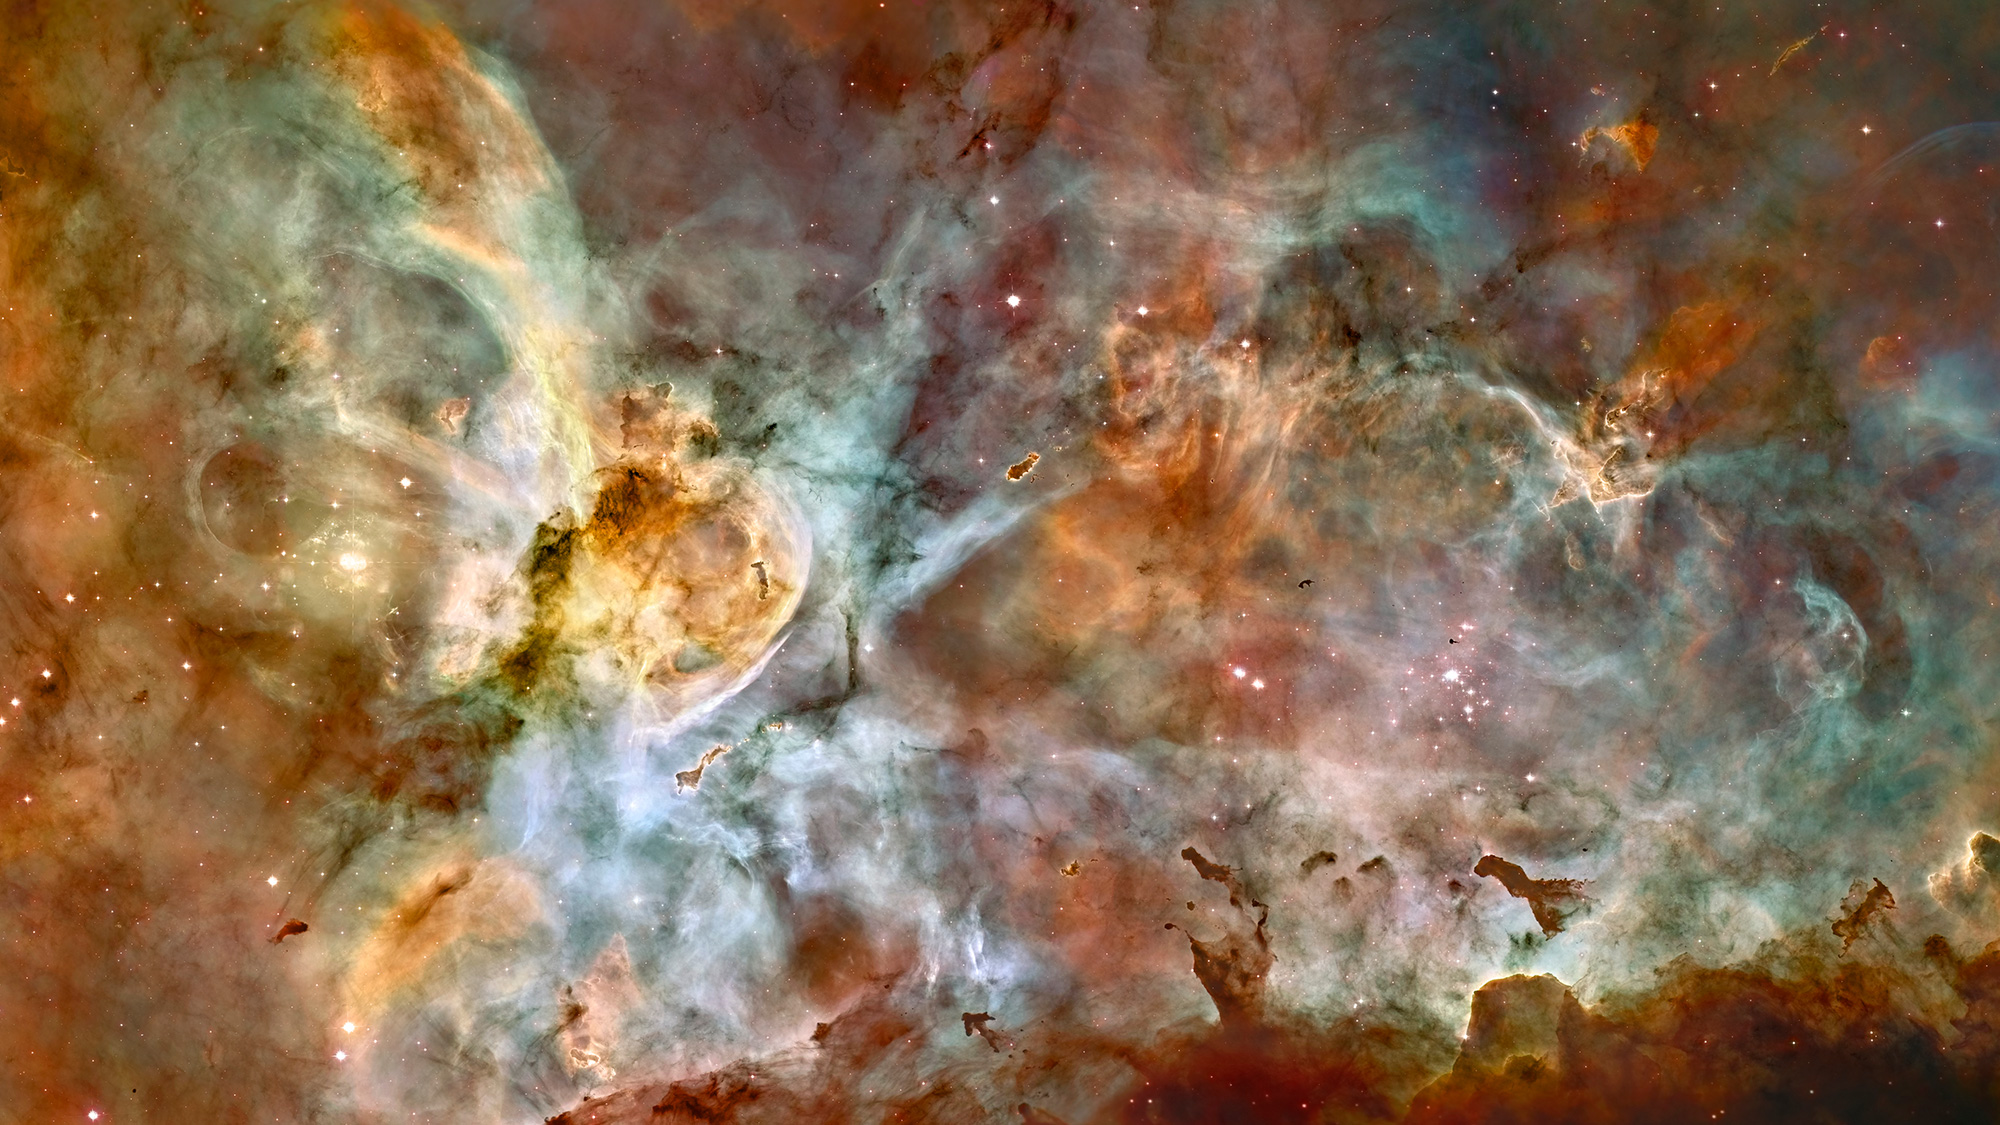 The Hubble Space Telescope captured this 50-light-year-wide view of the central region of the Carina Nebula.